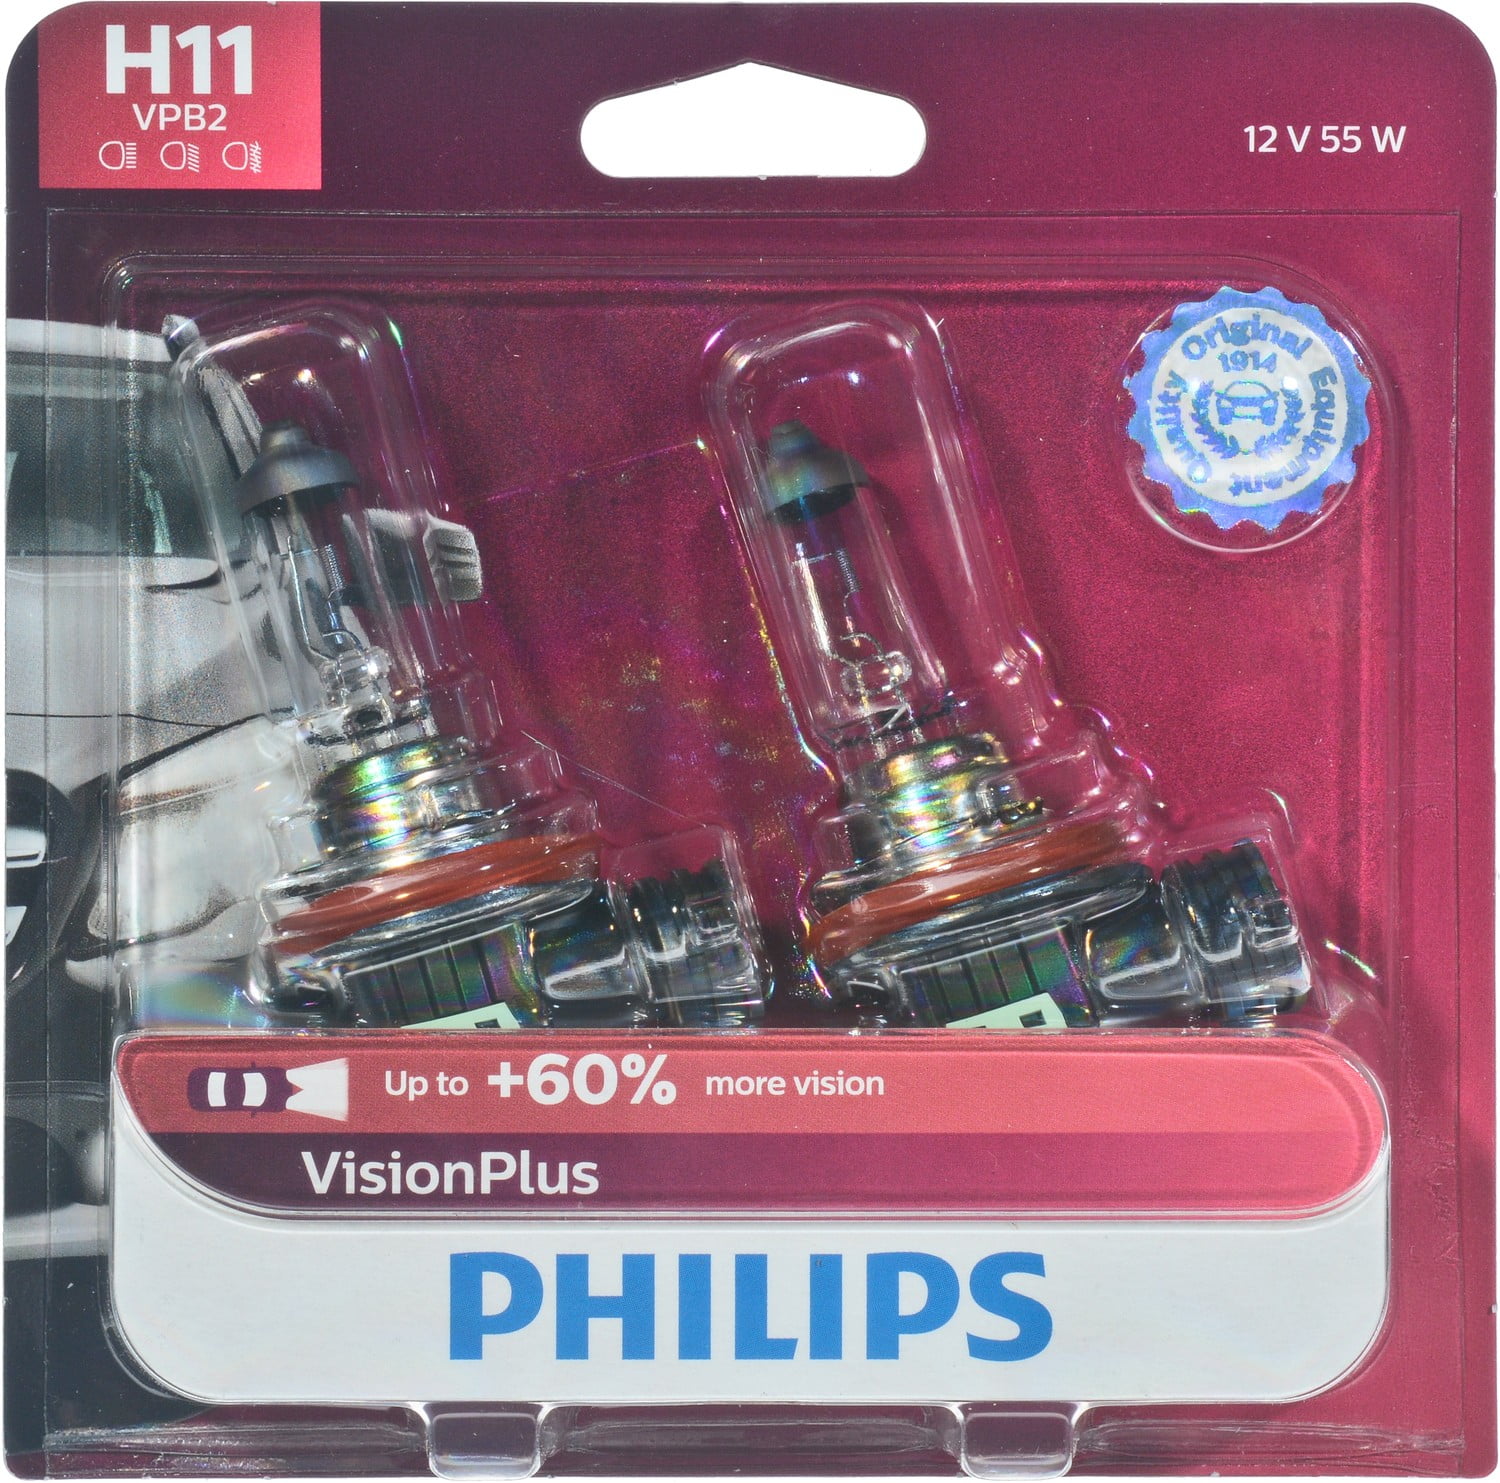 Photo 1 of Philips H11 Visionplus Headlight, Pack of 2